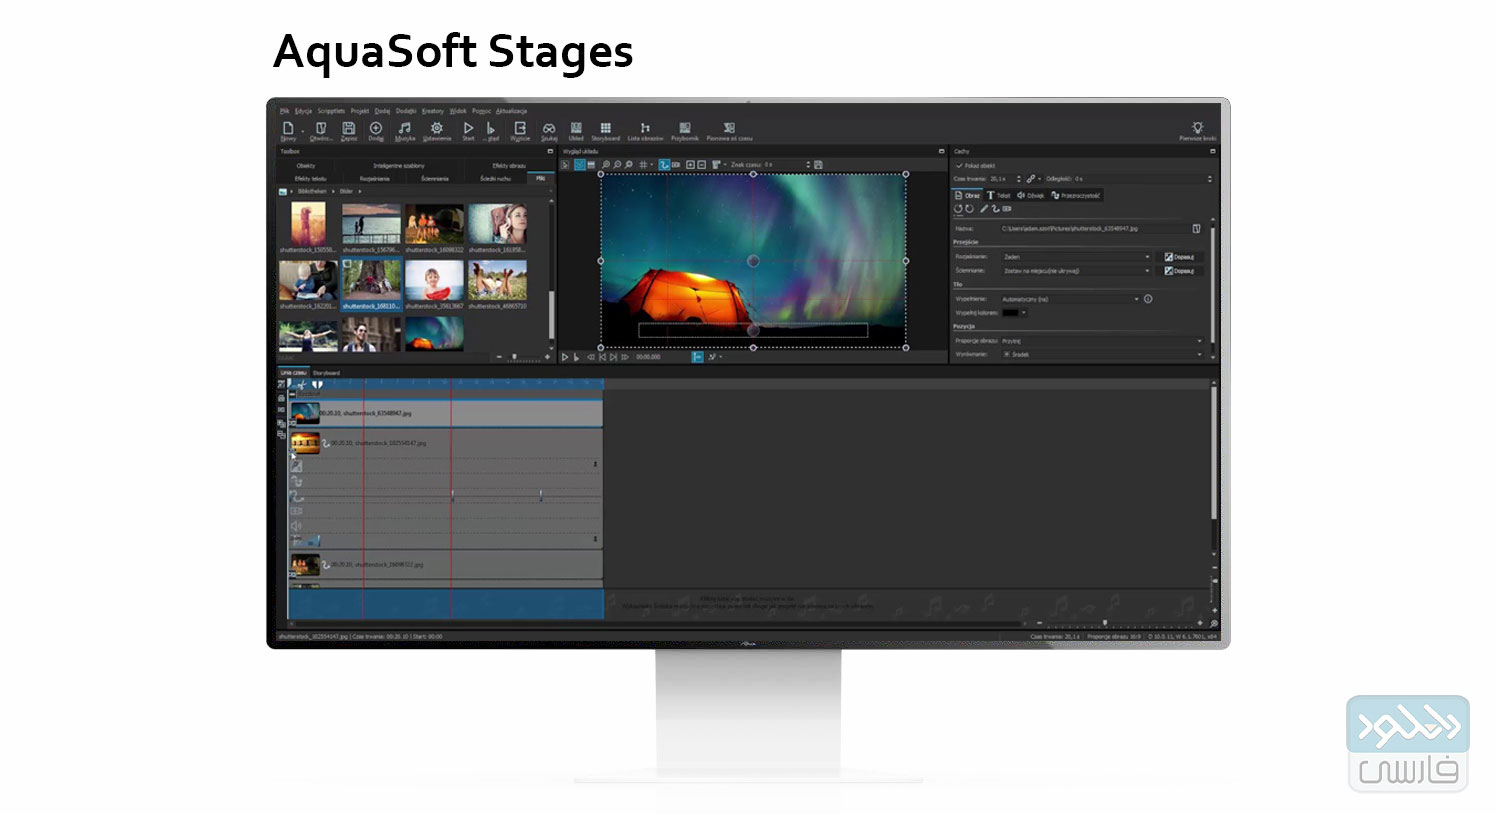 AquaSoft Stages 14.2.10 download the new for windows